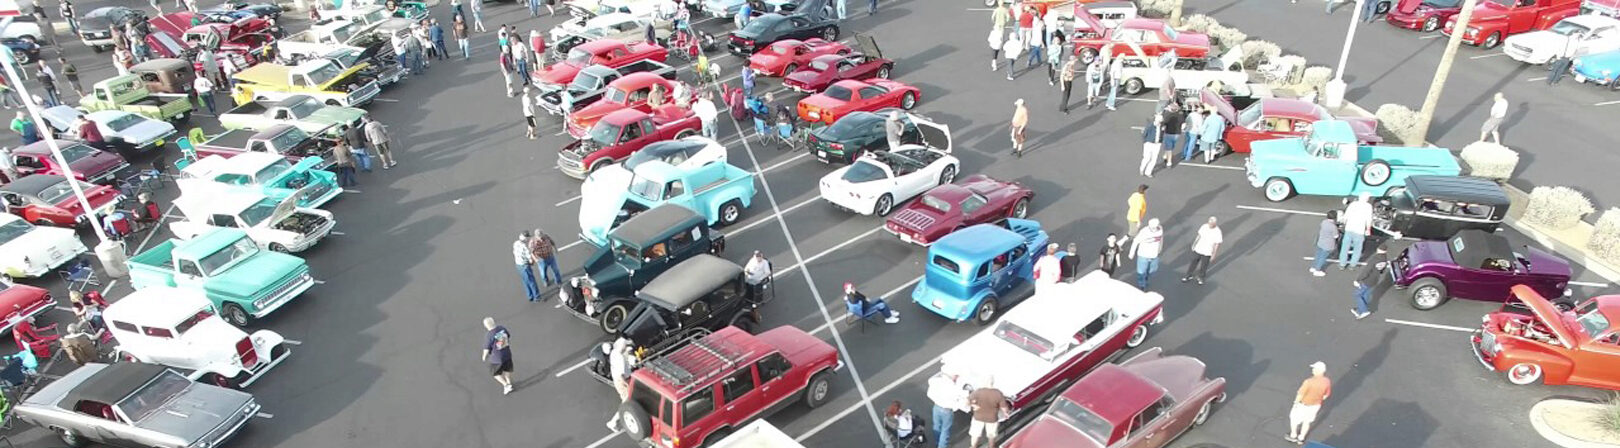 East Valley Cruisers Weekly Car Show